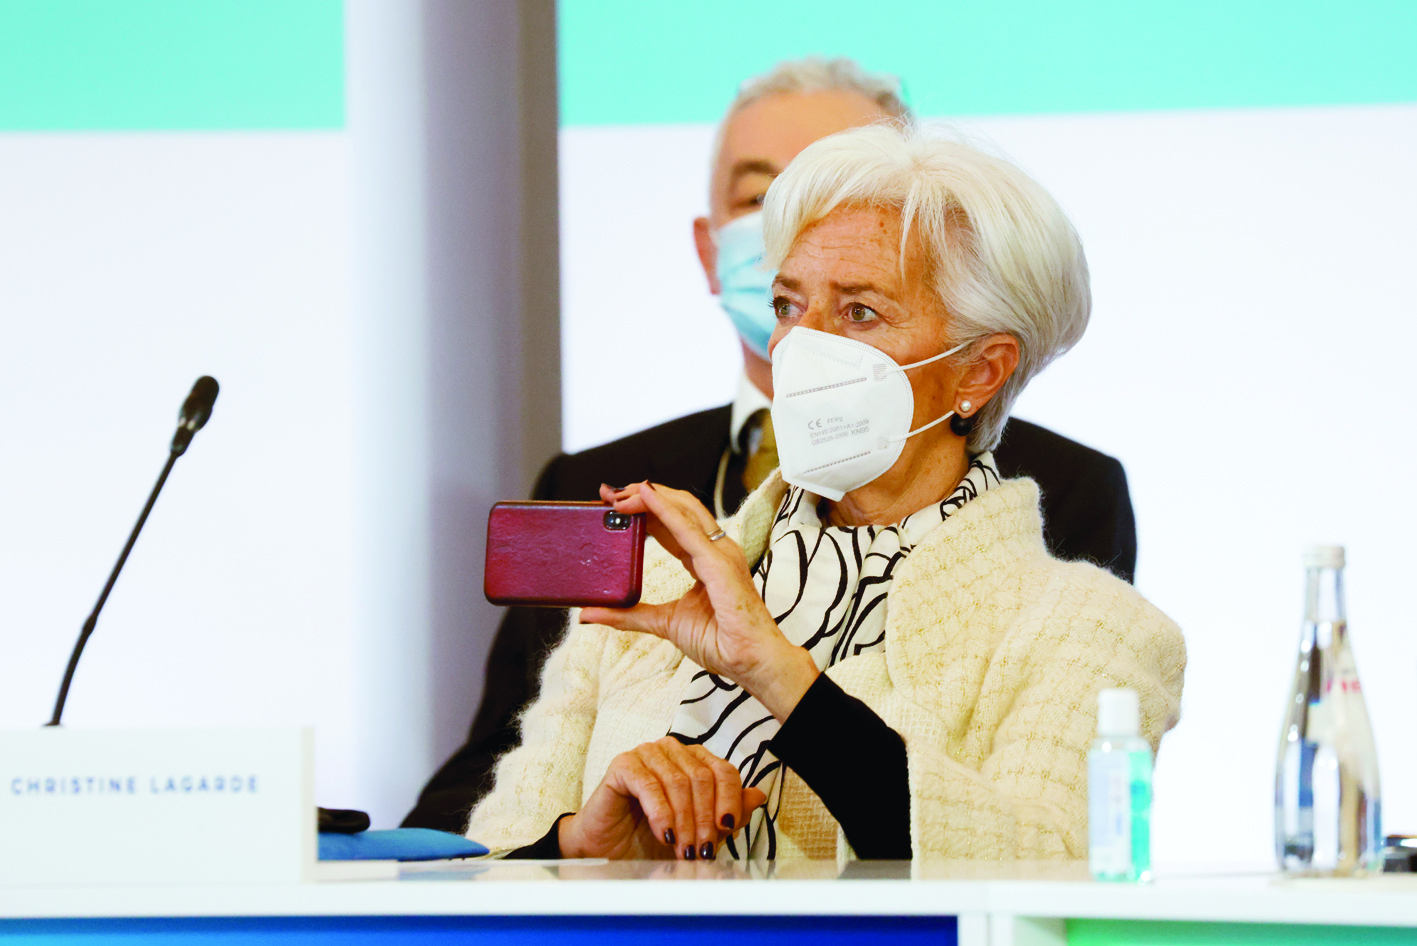 PARIS: President of the European Central Bank (ECB) Christine Lagarde holds her smartphone as she attends the One Planet Summit, part of World Nature Day, at the Reception Room of the Elysee Palace, in Paris, on Tuesday. - AFPn